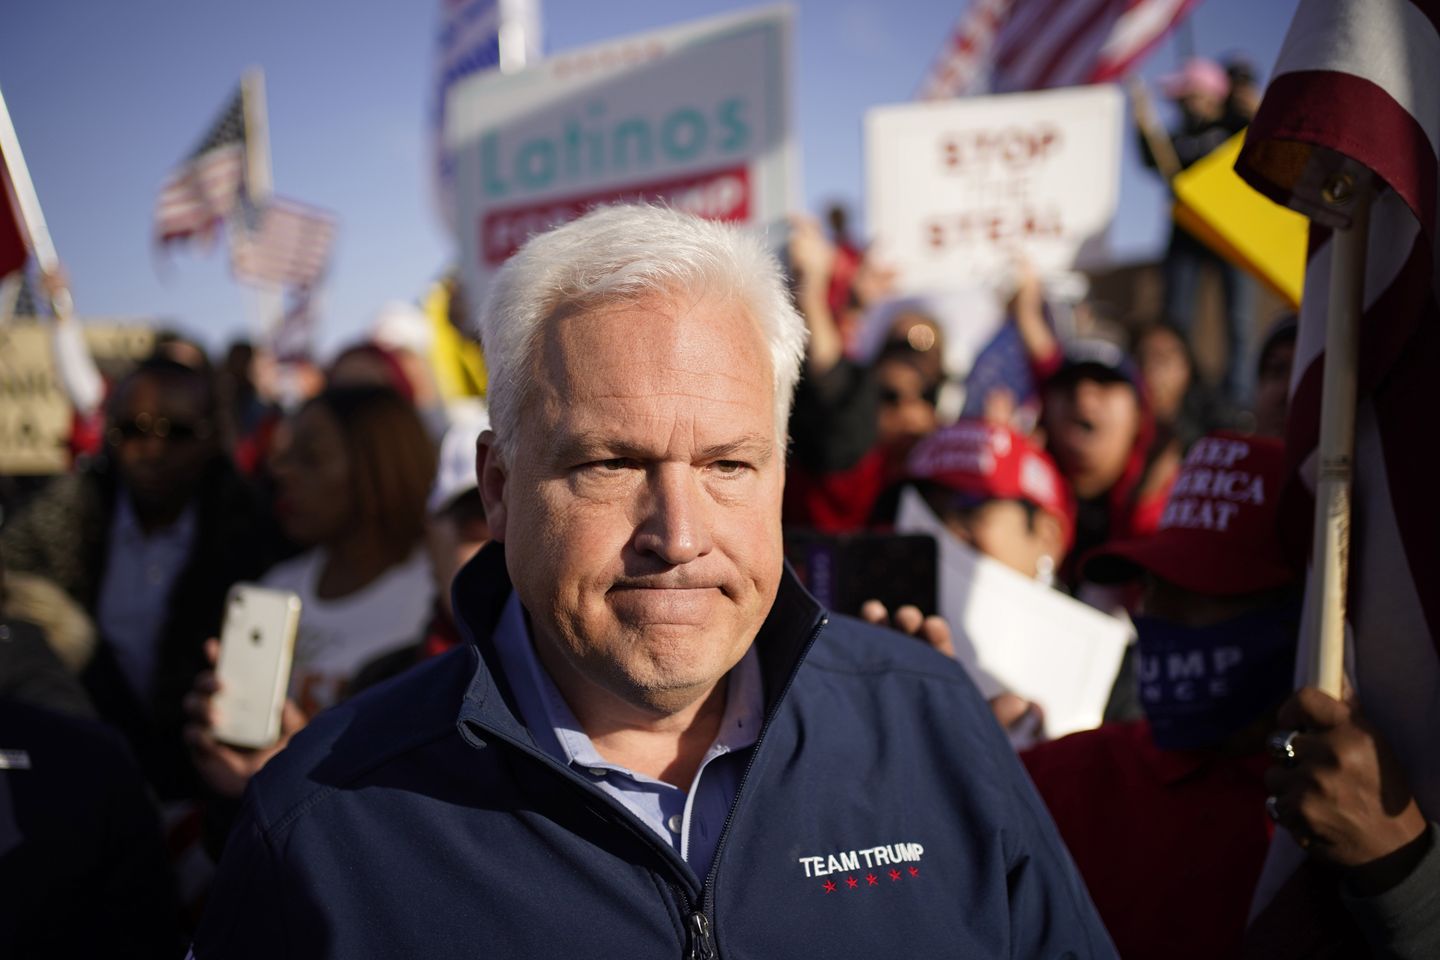 CPAC honcho Matt Schlapp hit with anonymous lawsuit over alleged same-sex harassment